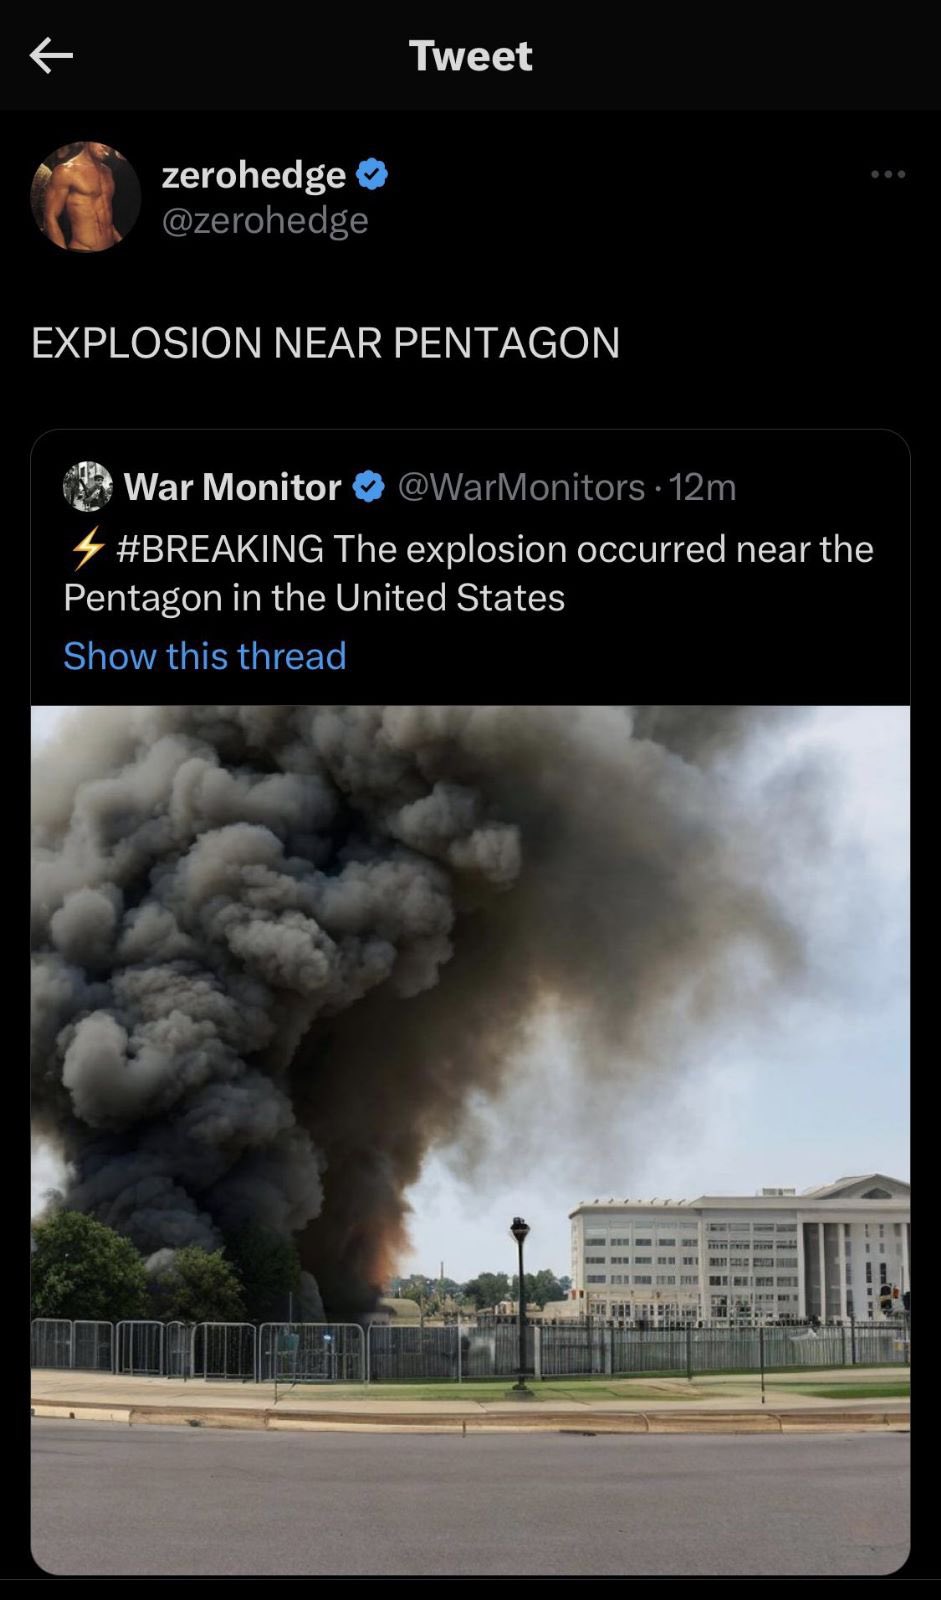 Genevieve Roch-Decter, CFA on Twitter: "This AI-generated image of an  explosion at the Pentagon tricked several breaking news accounts, and  caused the stock market to drop temporarily @elonmusk this is why we